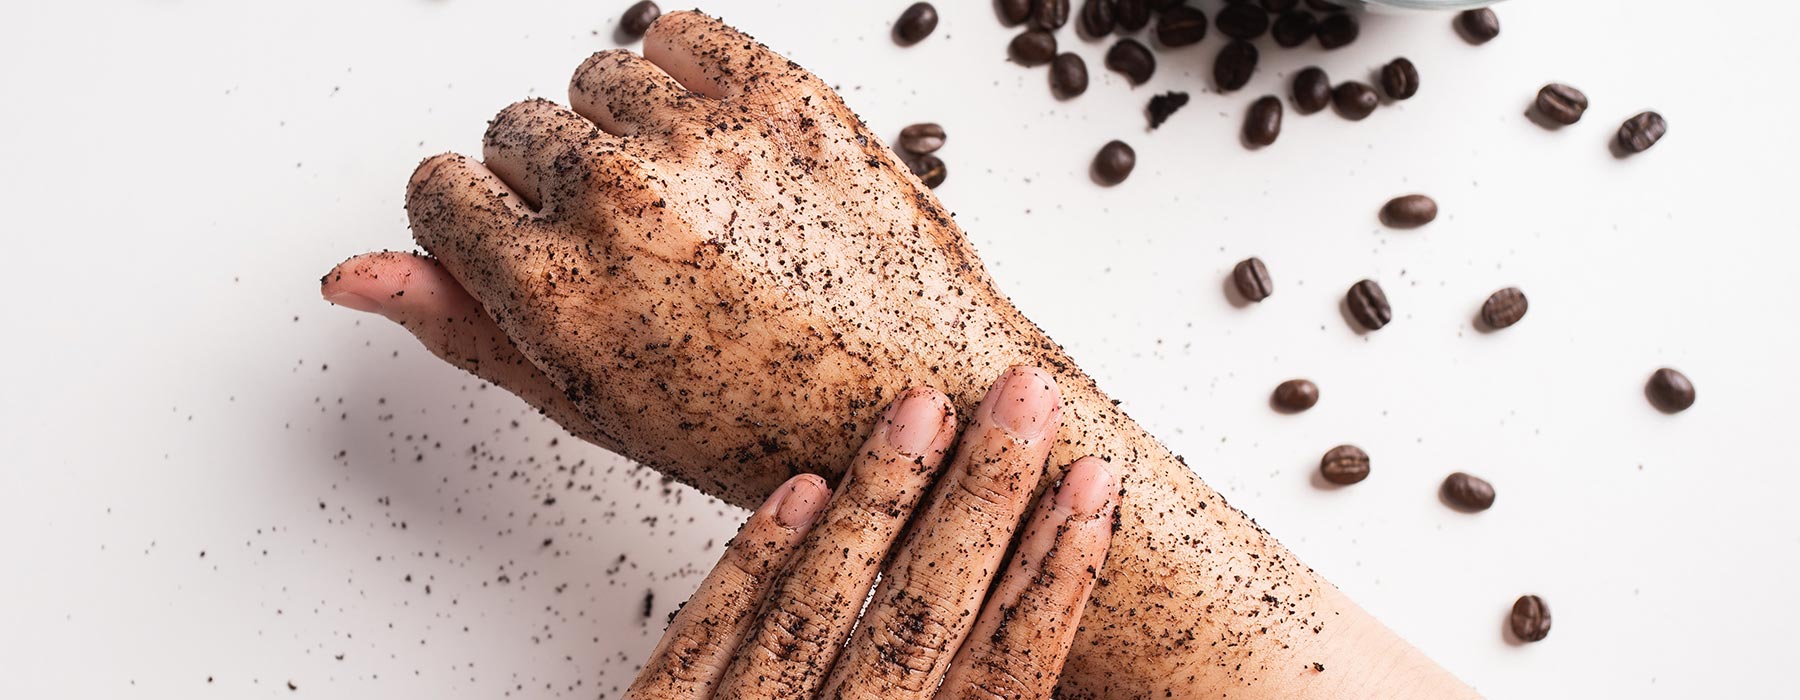 The 10 best ways to recycle coffee grounds: Using coffee grounds as a skin rub - Blog by EspressoWorks